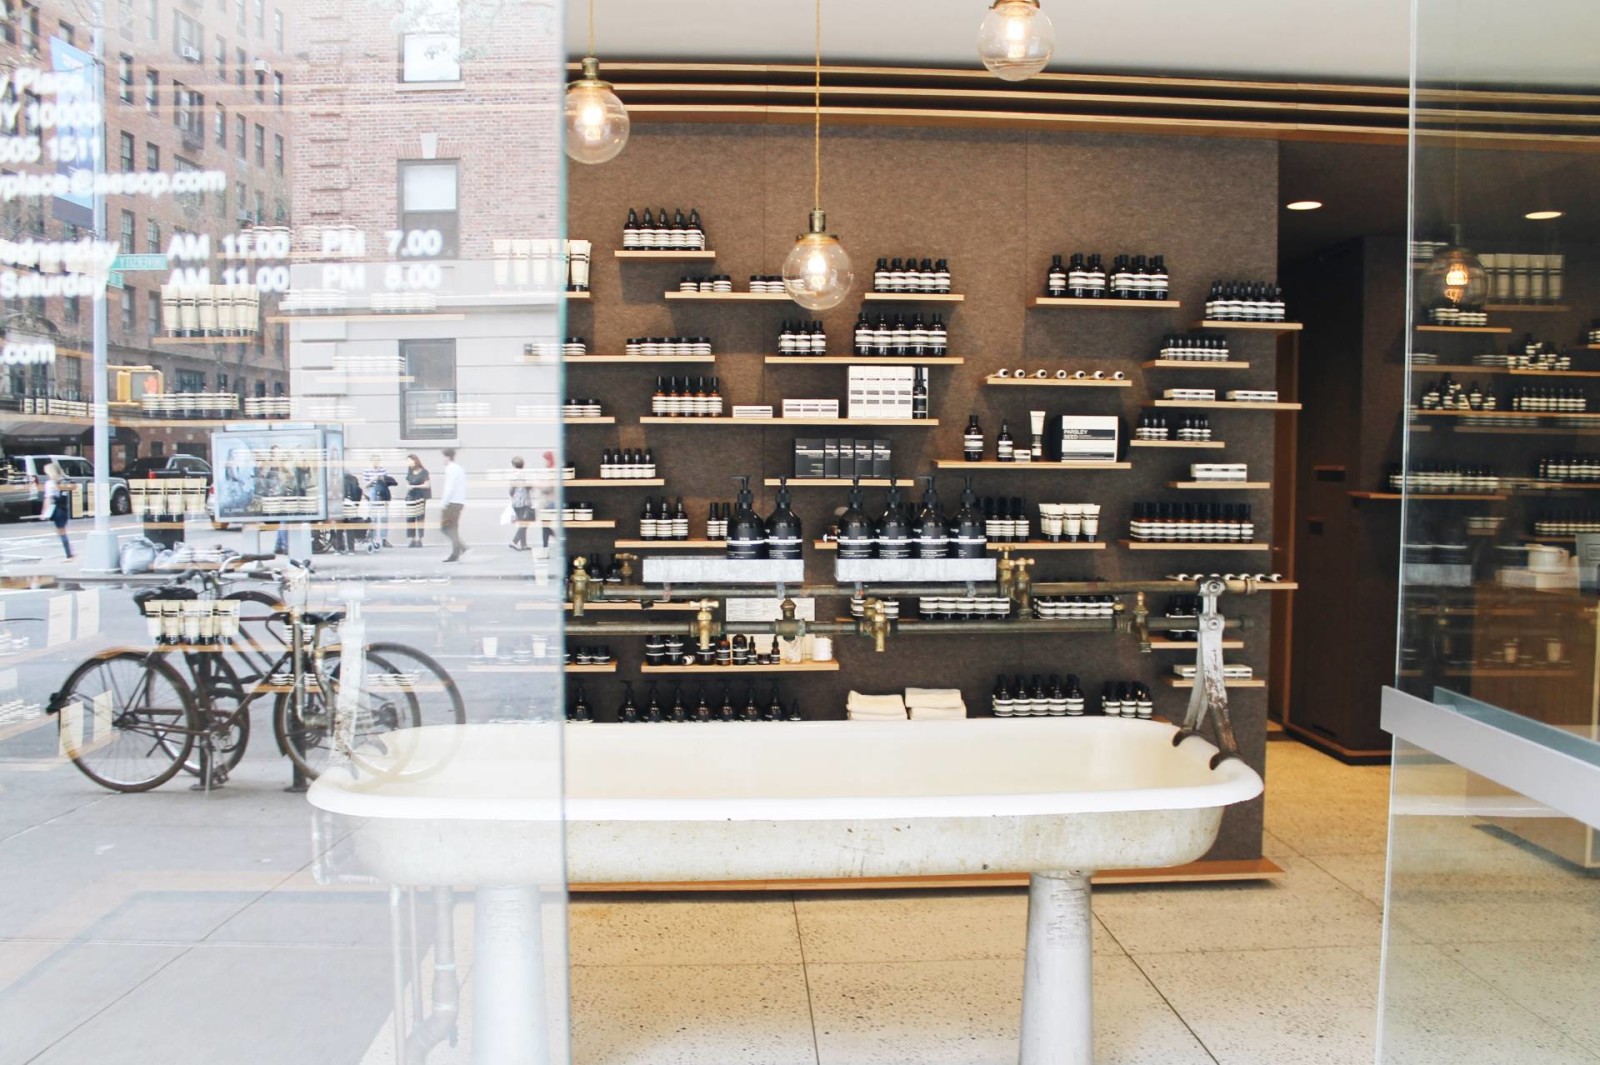 A Look Inside The Aesop Store On University Place in NYC